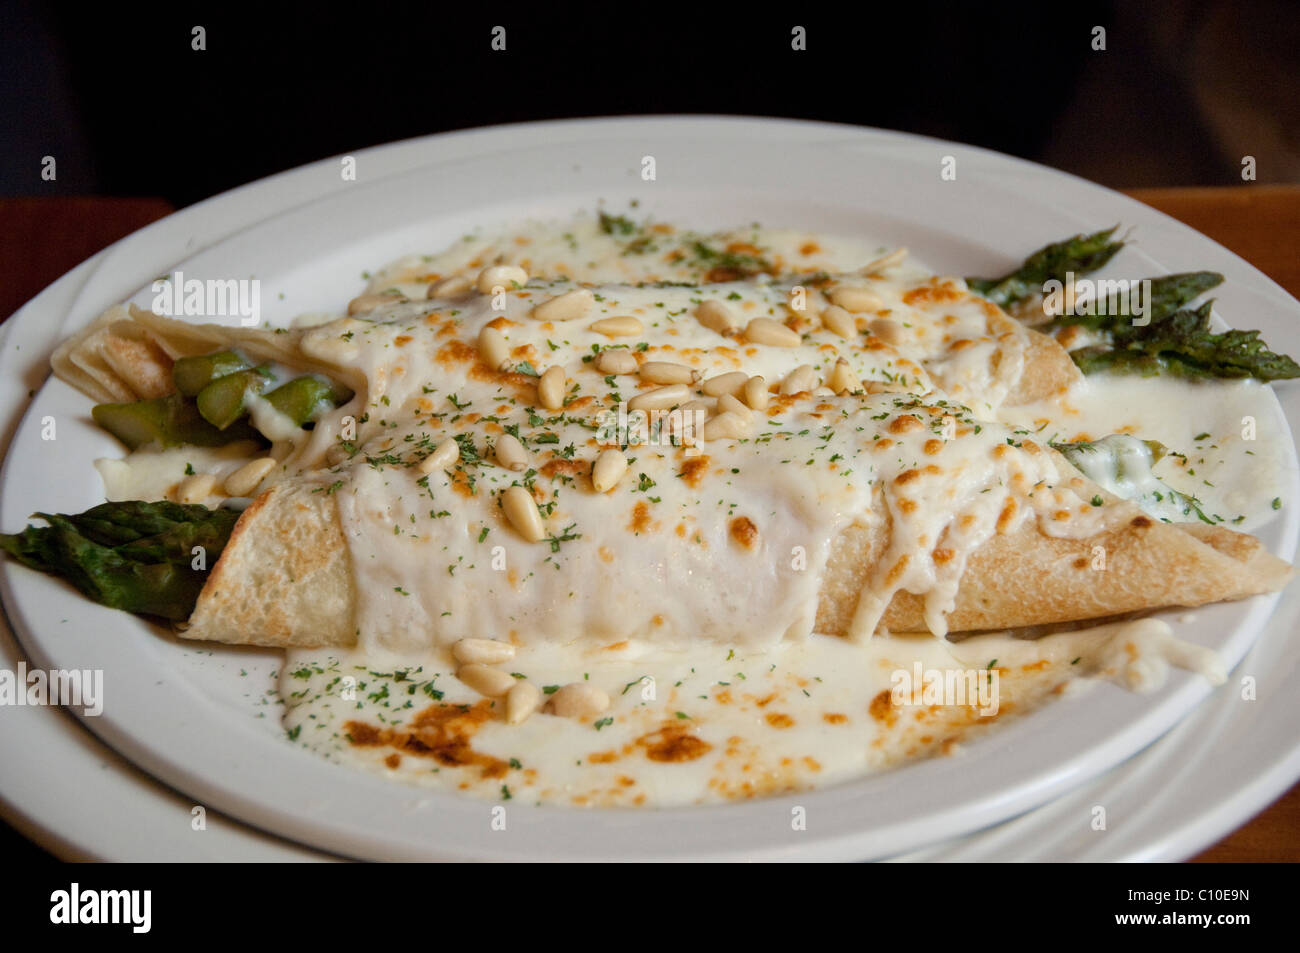 Canada, Quebec, Montreal. Typical French Canadian food, asparagus crepes  with cheese sauce & pine nuts Stock Photo - Alamy